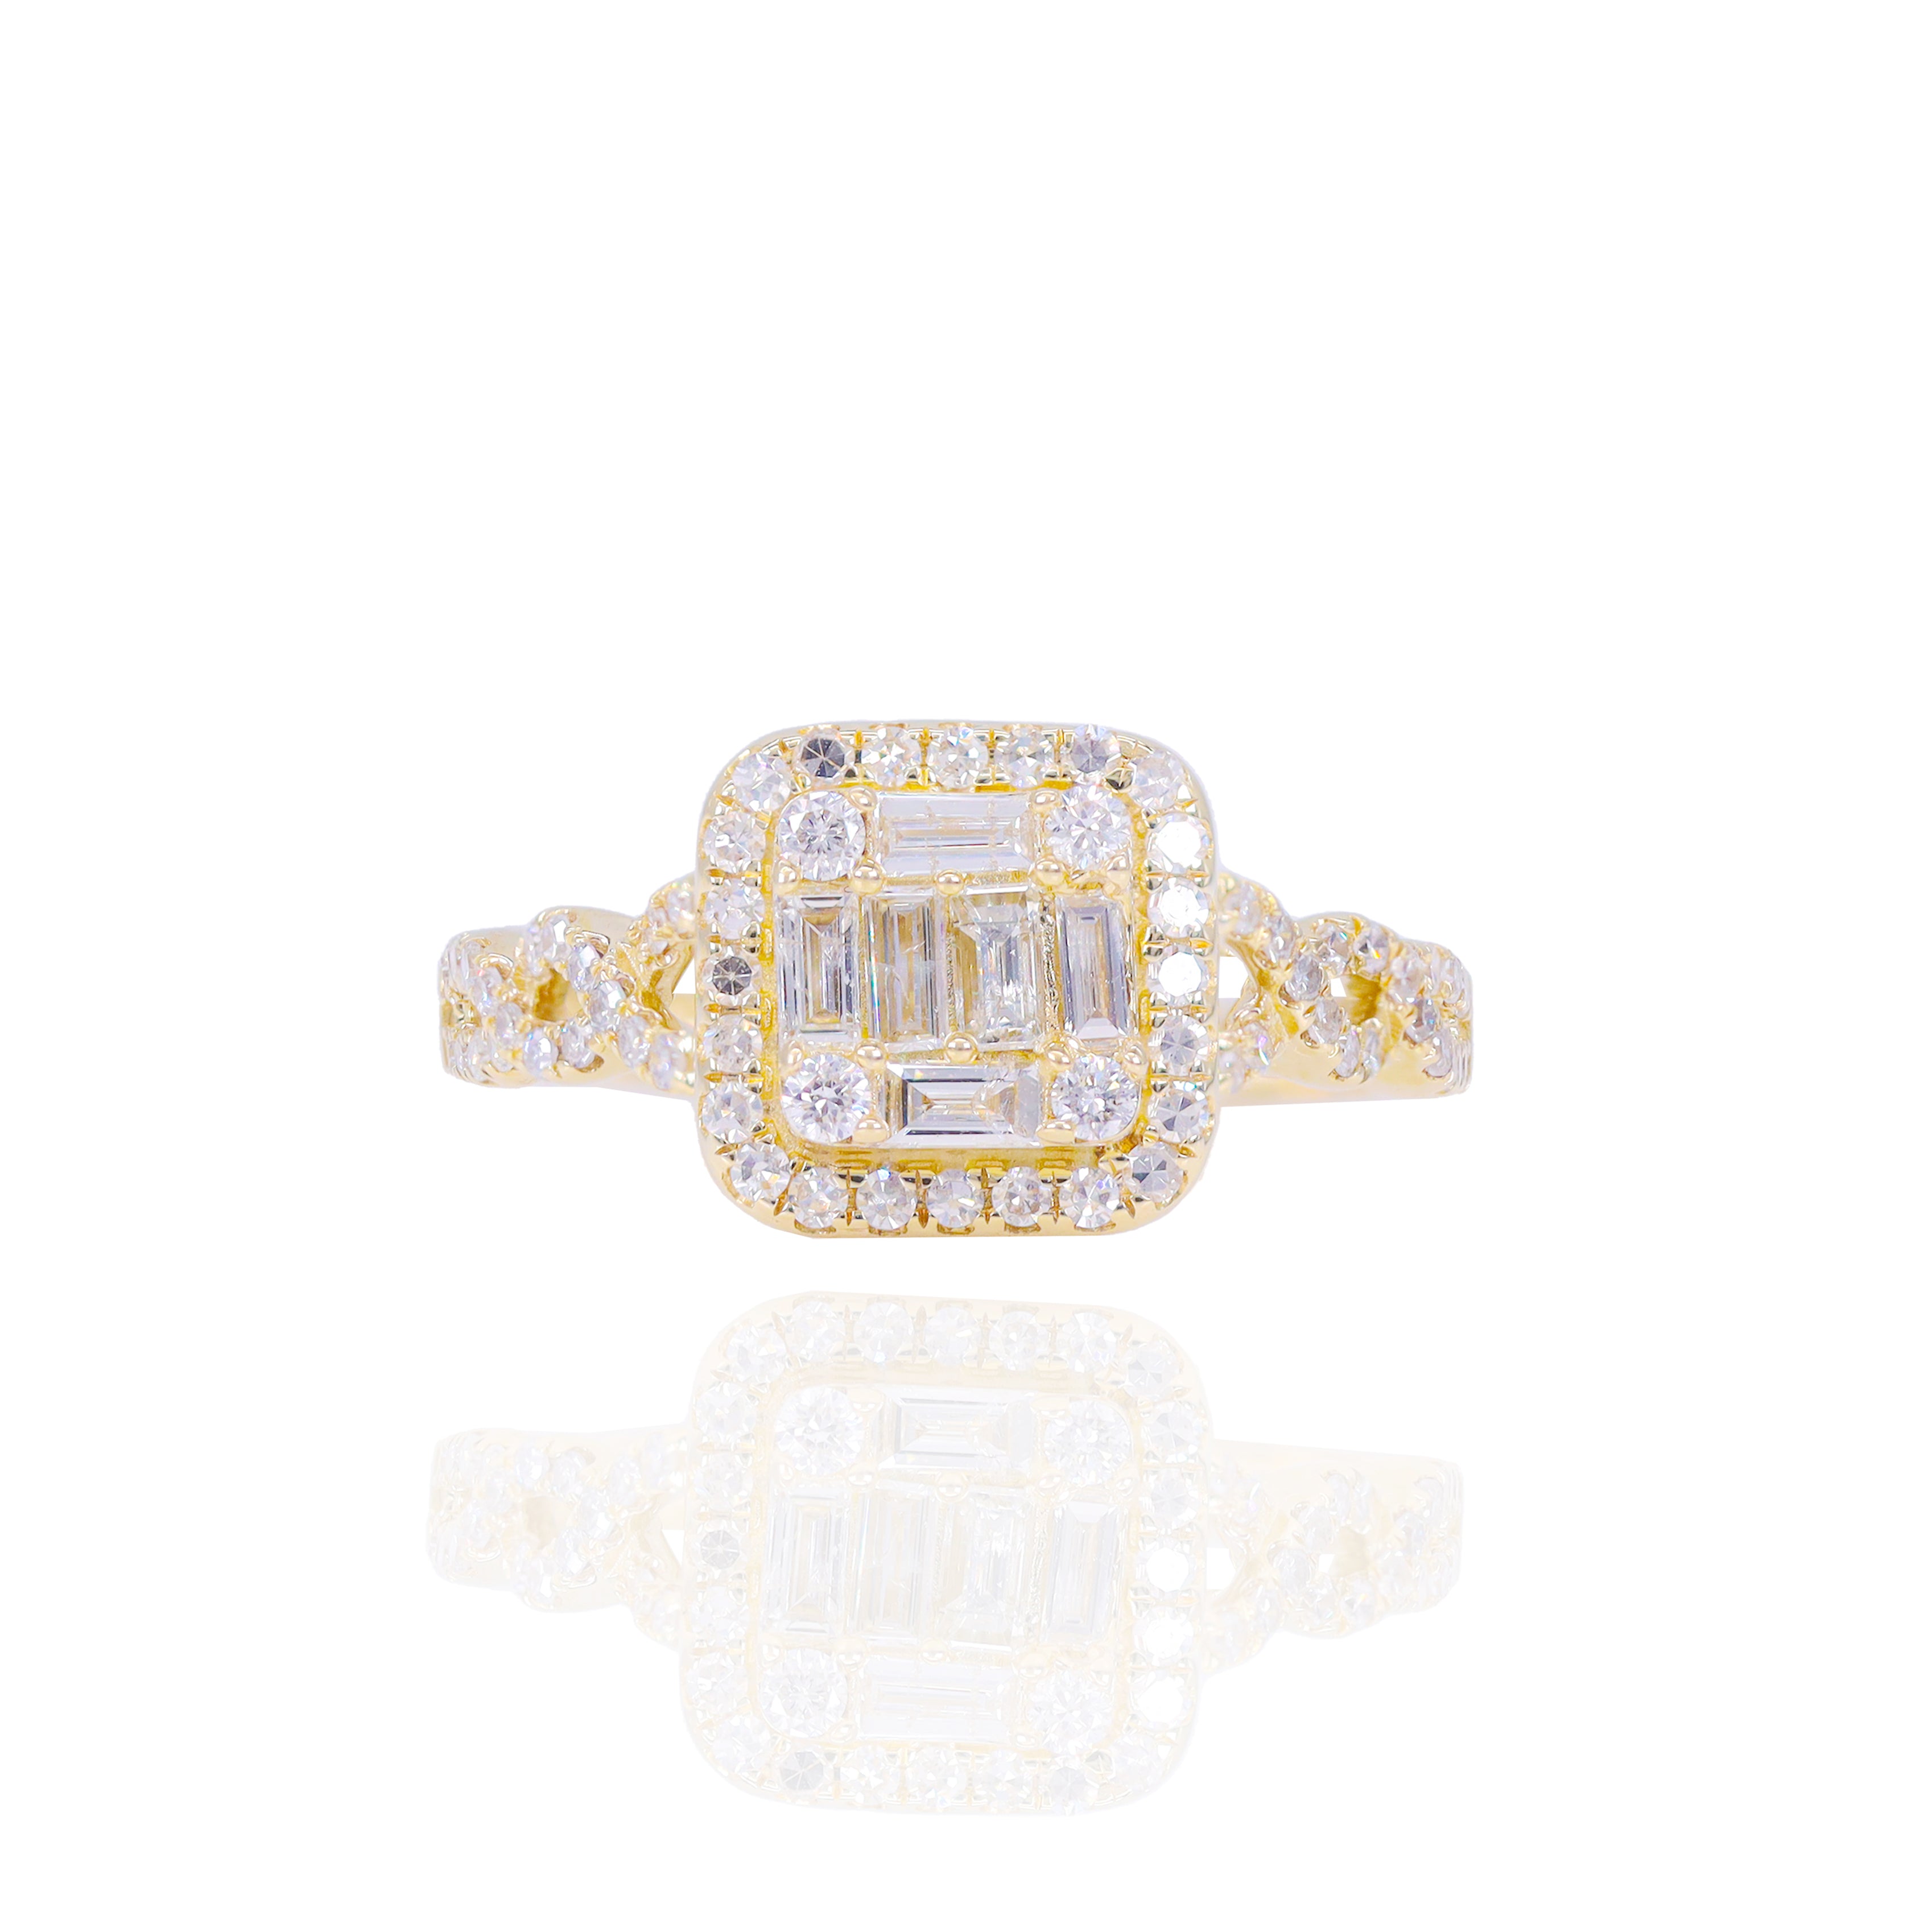 Princess Shaped Diamond Engagement Ring with Halo and Woven Shank & Band